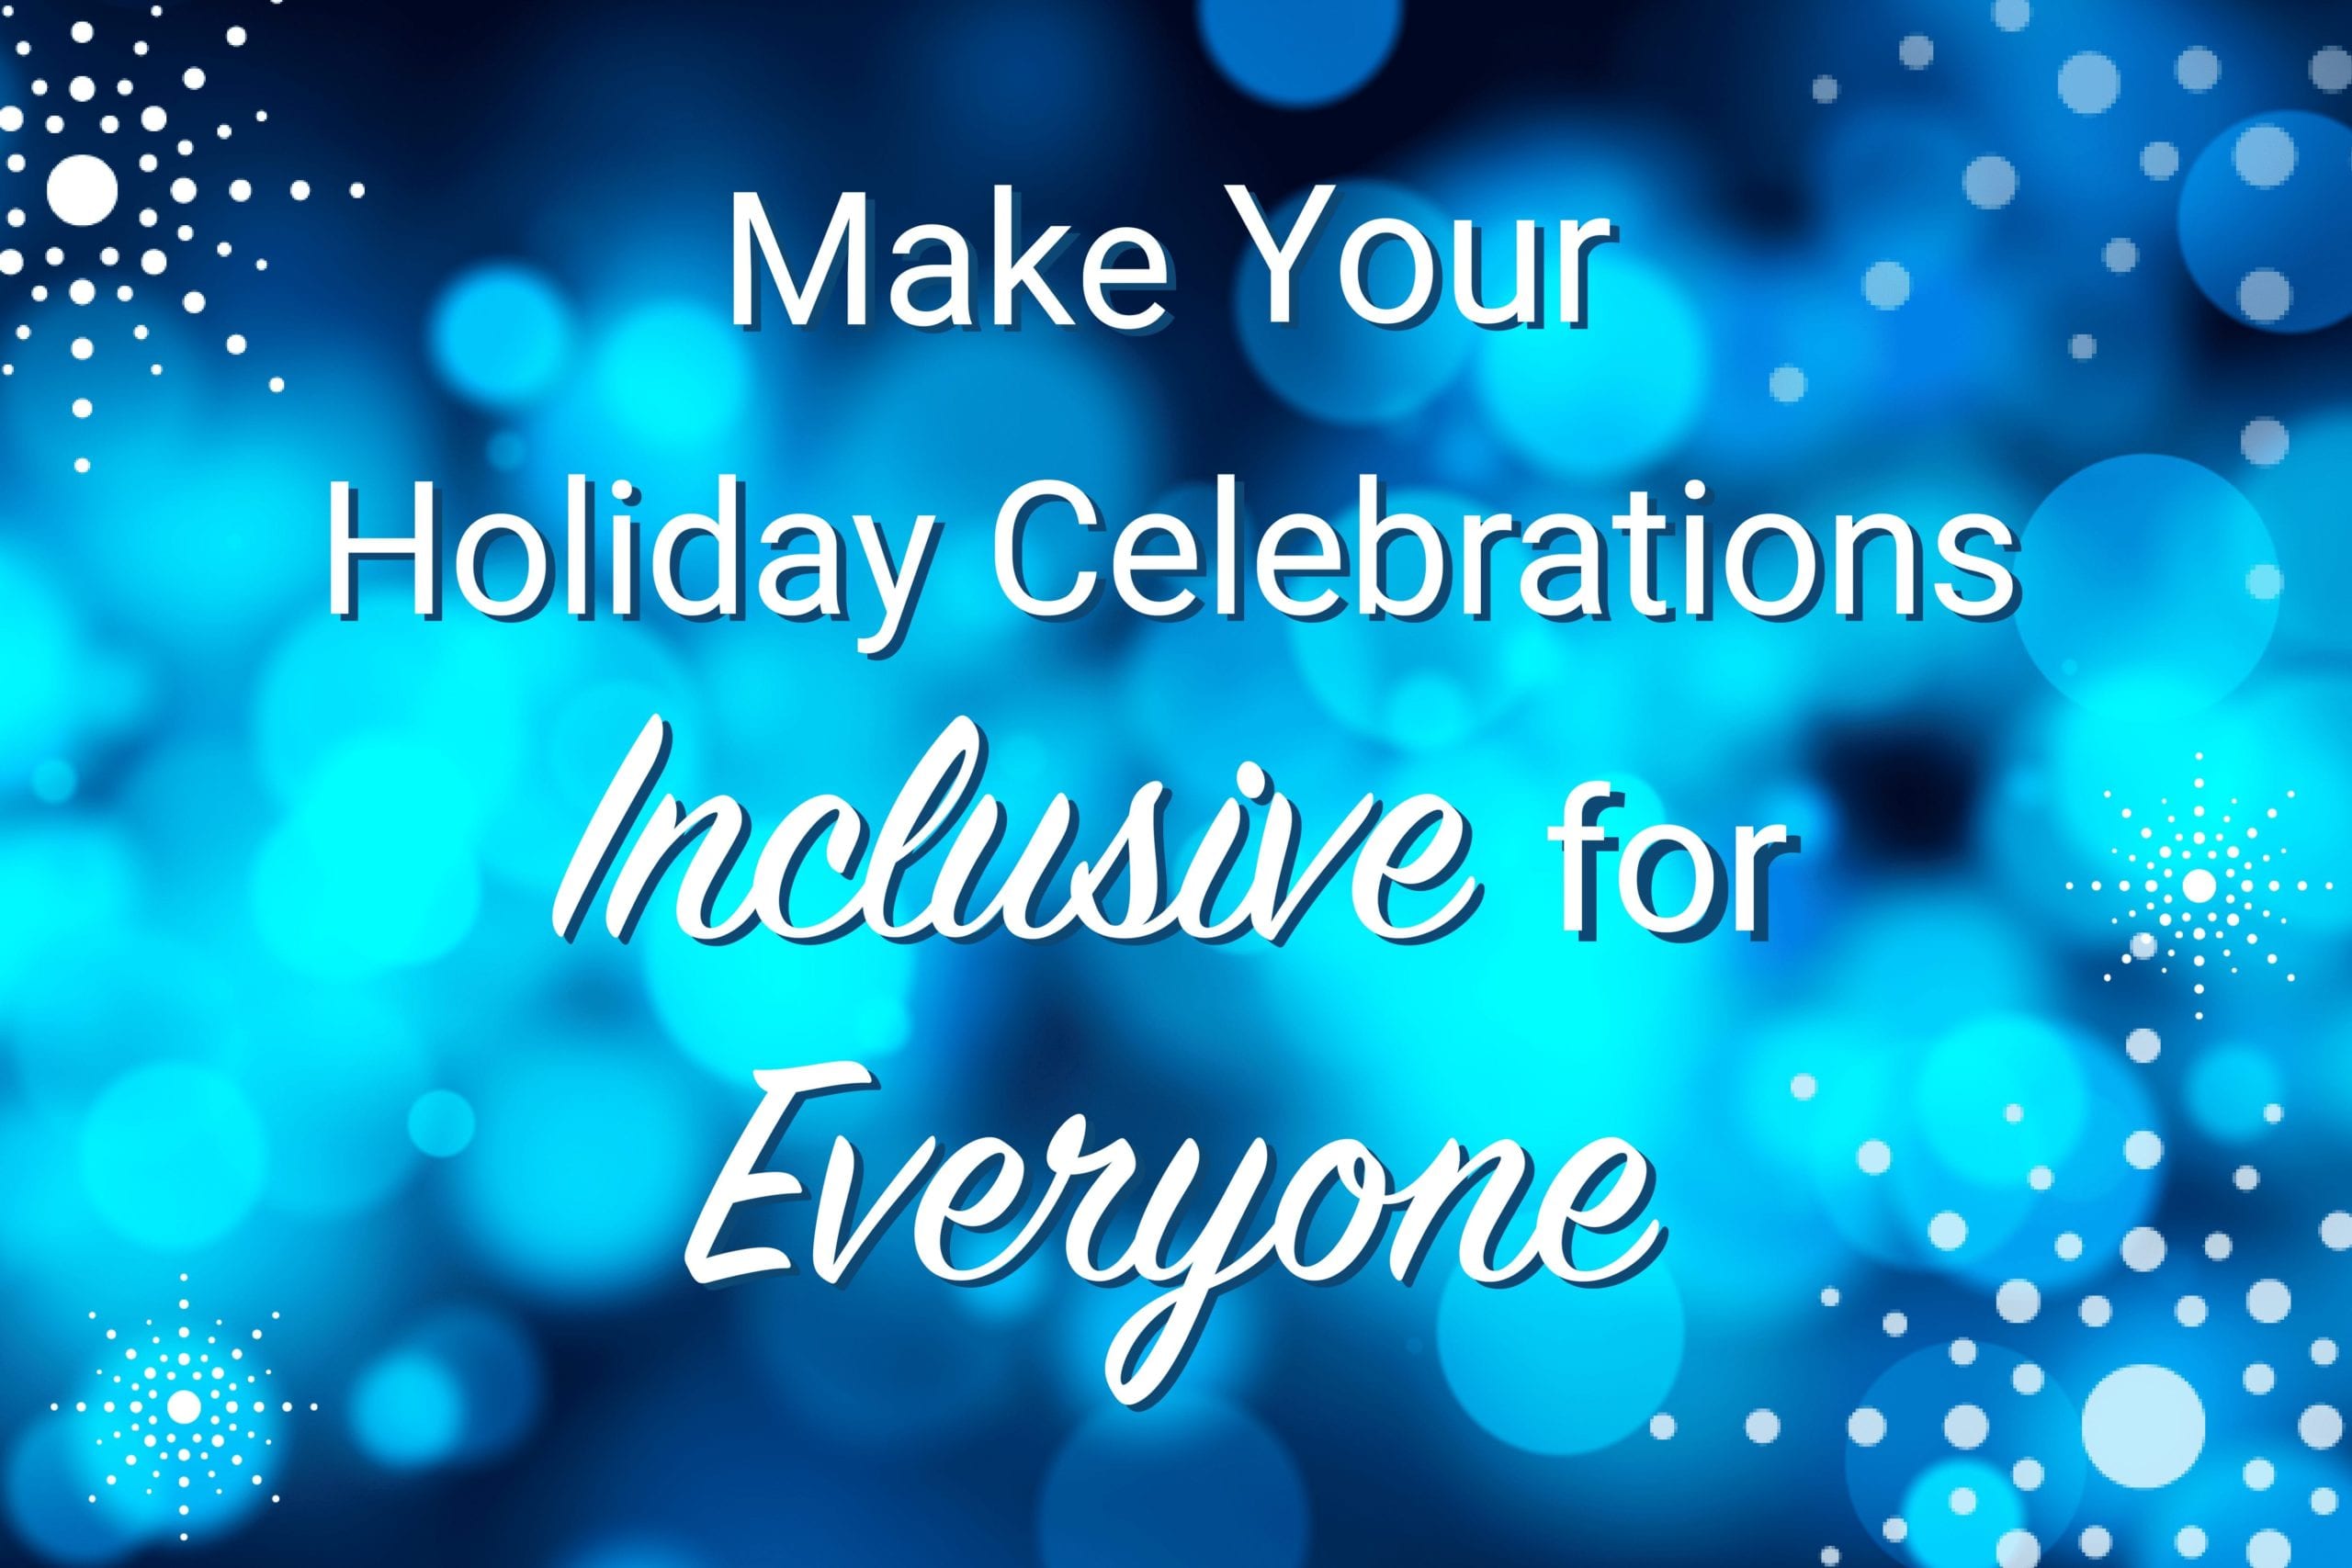 blurred blue lights with text "Make your holiday celebrations inclusive for everyone"